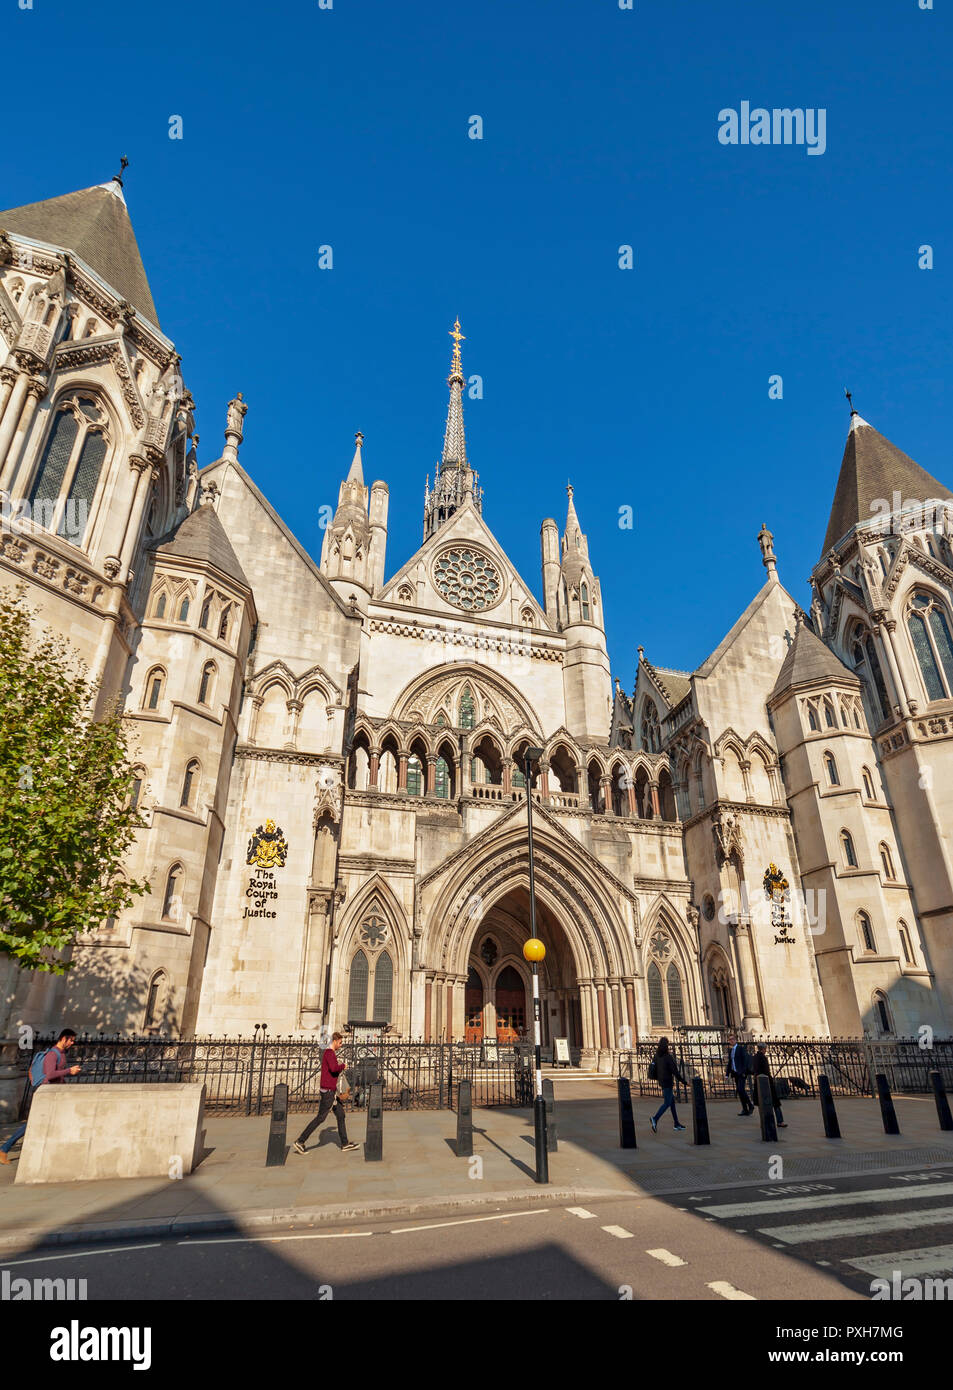 The Royal Courts of Justice, Strand, London. Stock Photo